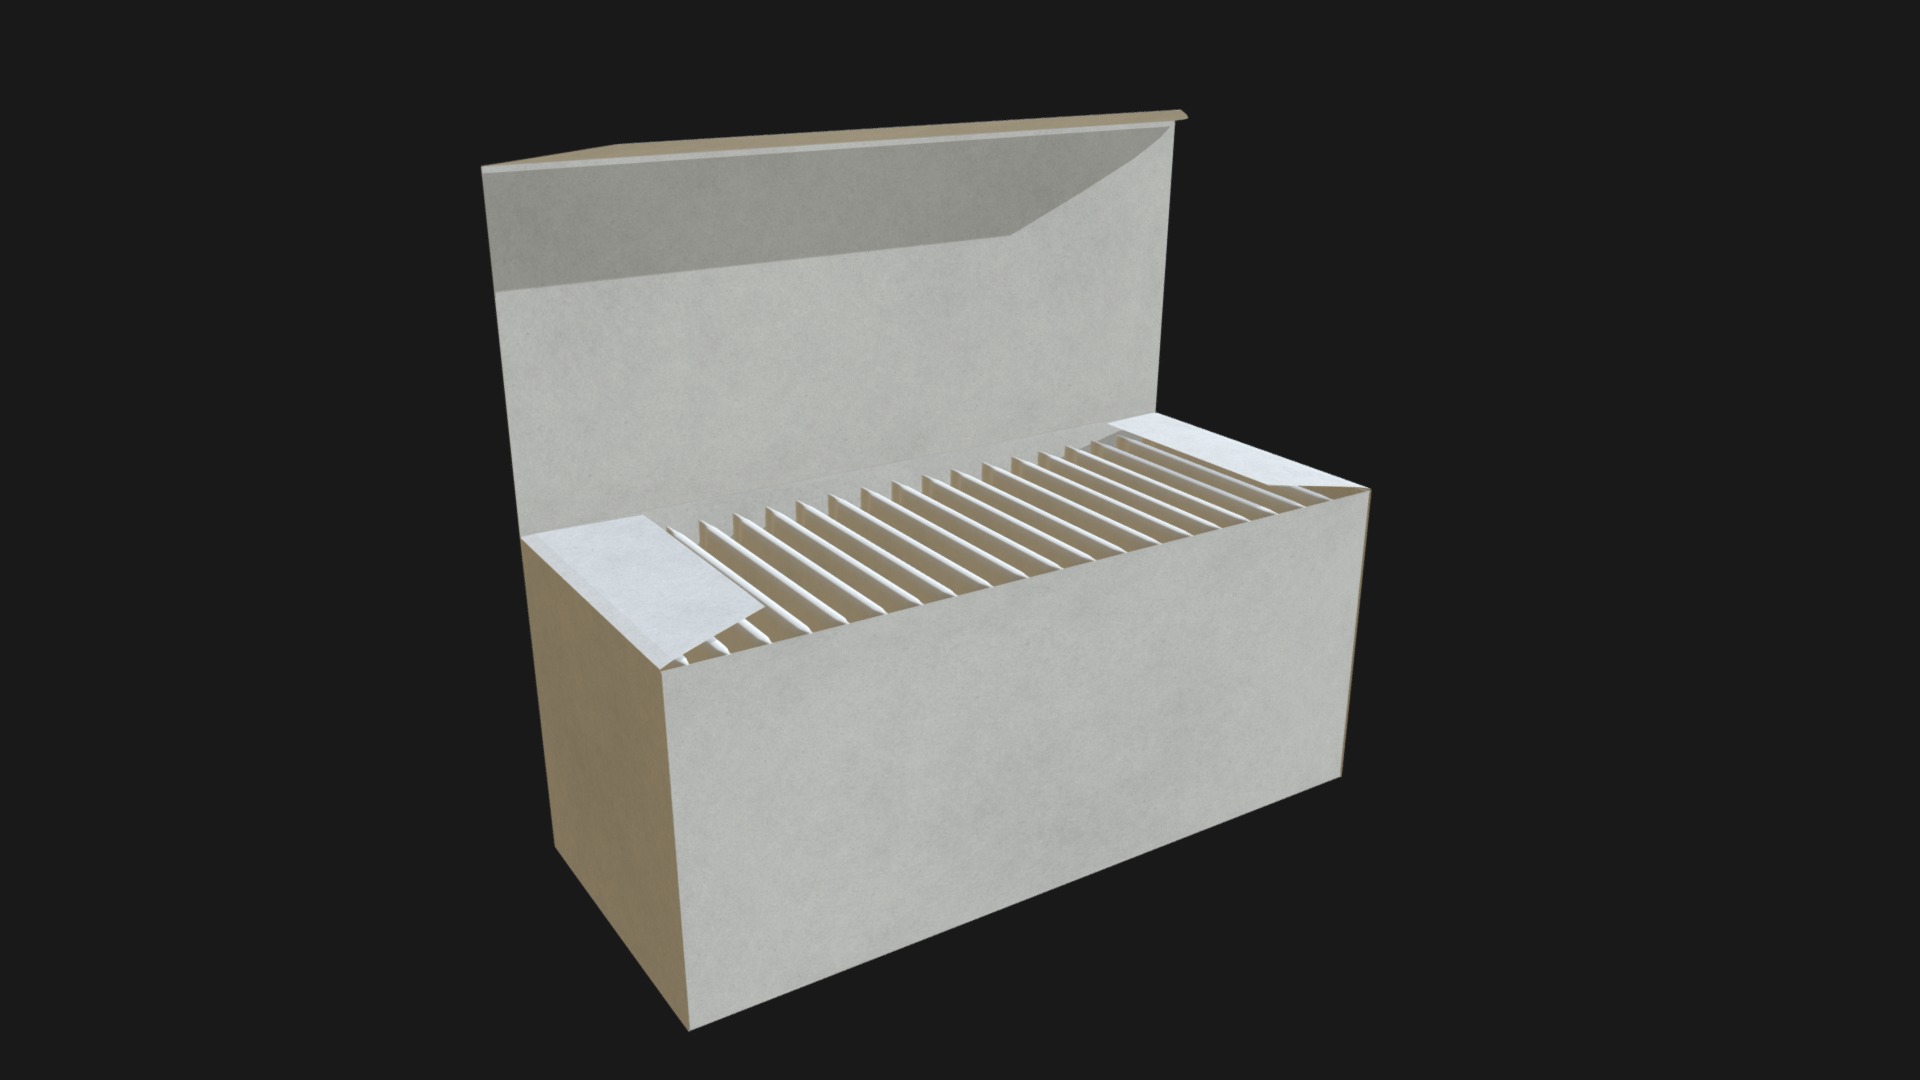 3D model Rectangular box filled with paper bags - This is a 3D model of the Rectangular box filled with paper bags. The 3D model is about a white box with a black background.